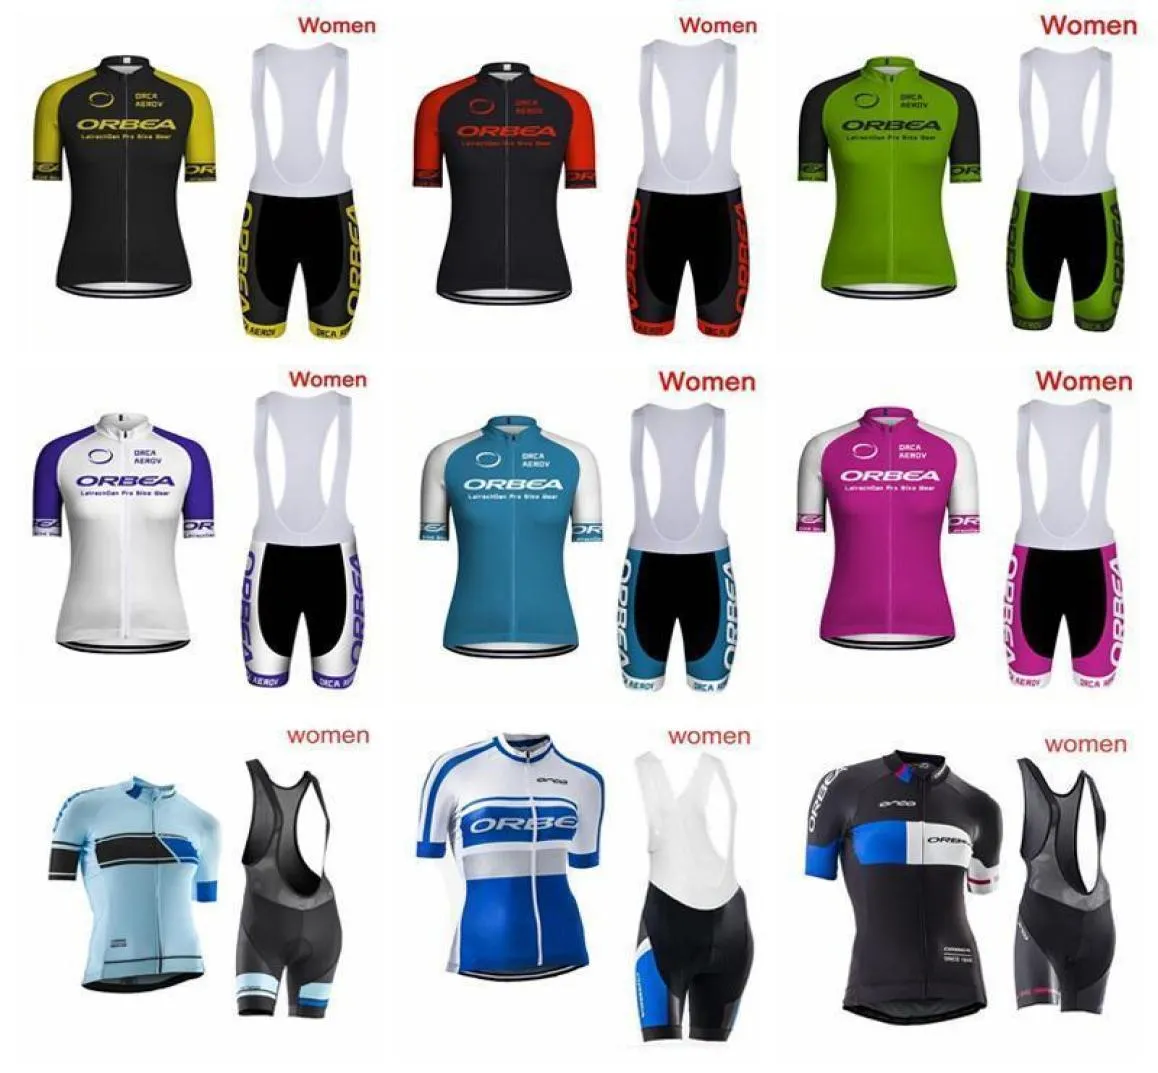 2020 Orbea Women Cycling Jersey Set 2020 Summer Short Sleeves Bicycle Clothes Quick Dry Mountain Bike Wear Racing Bicycle Clothing1595350